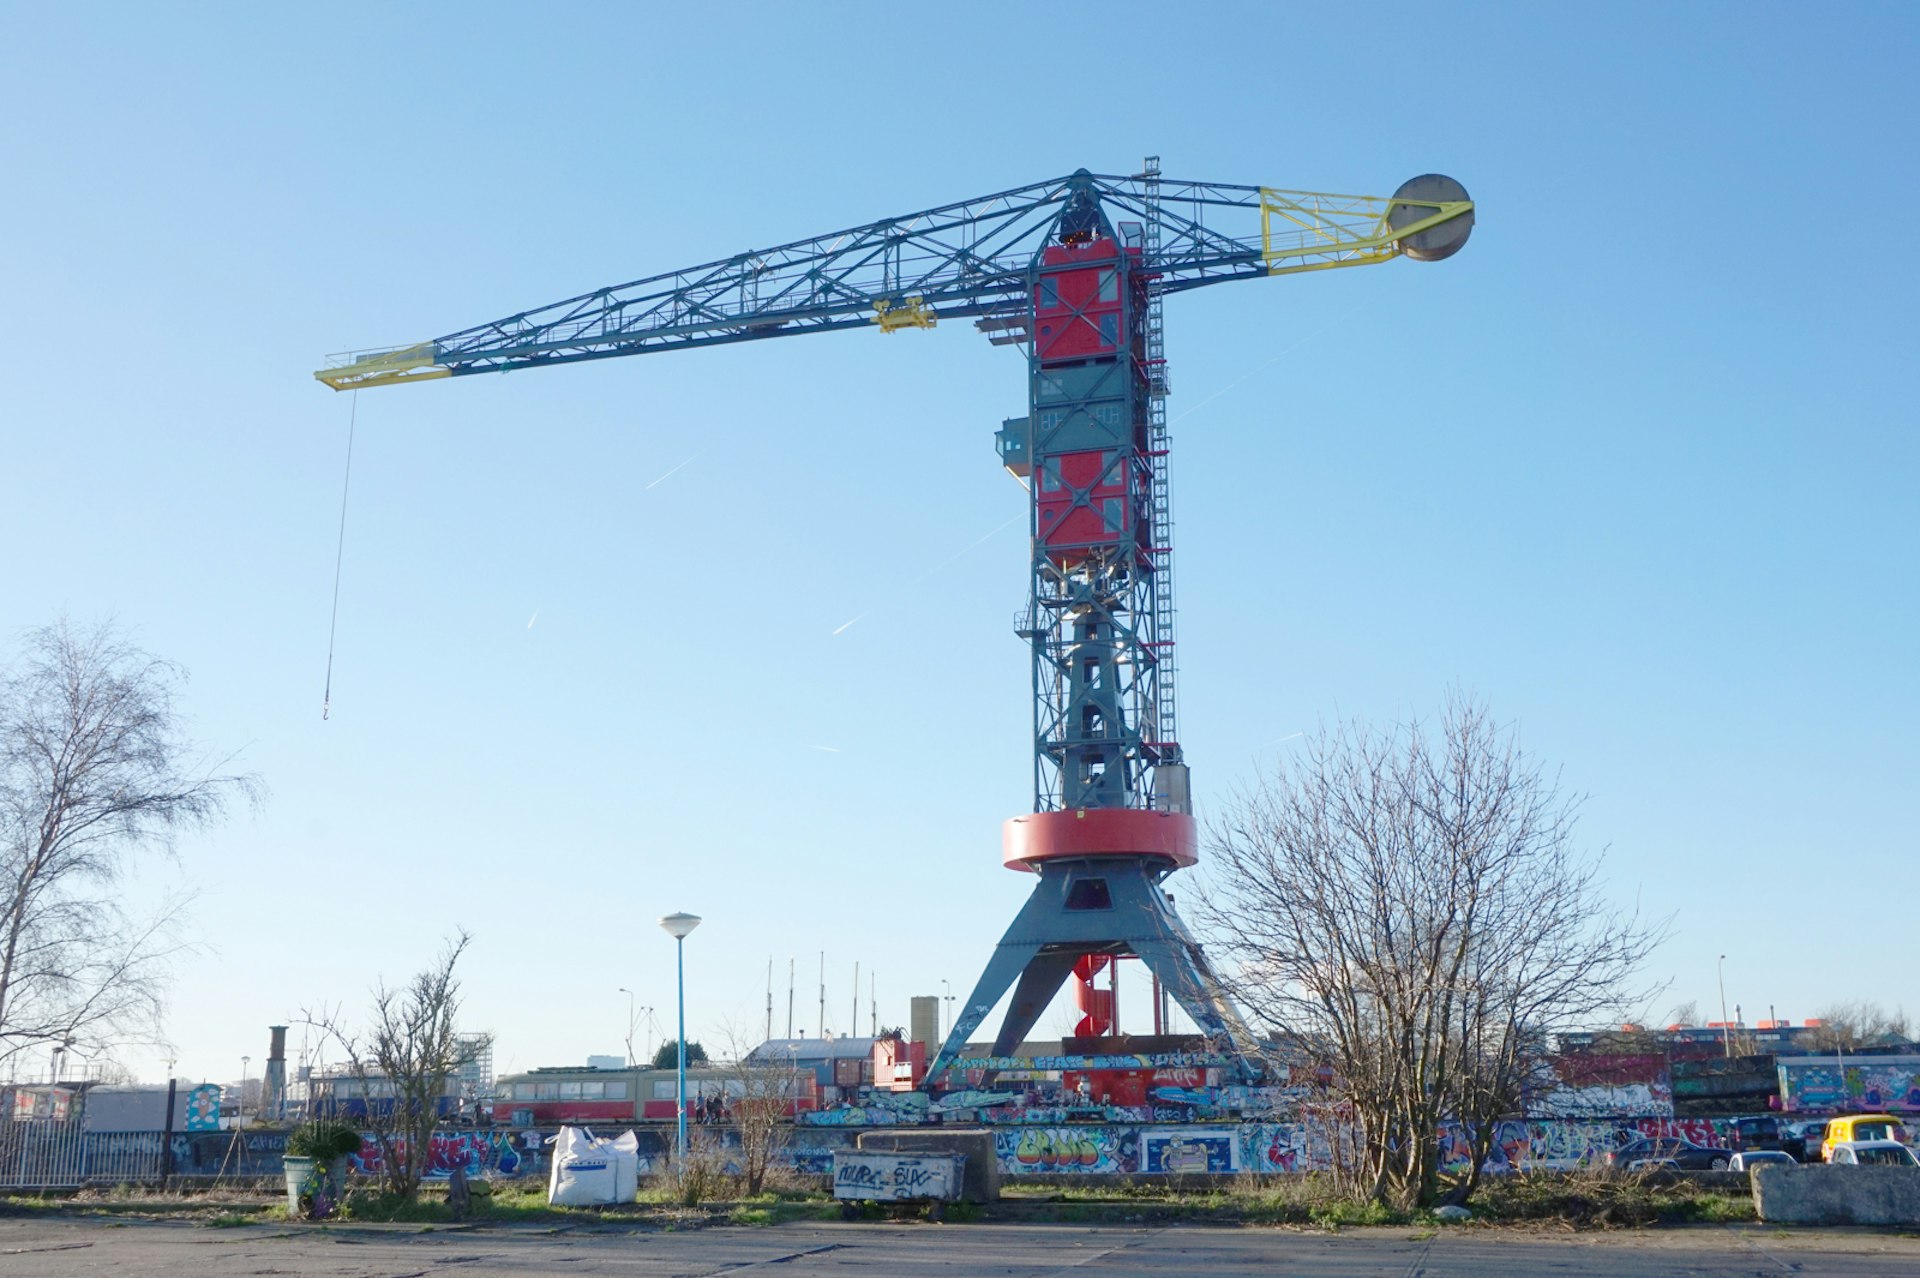 Housed in a converted industrial crane, the Faralda Crane Hotel has three suites and stellar views